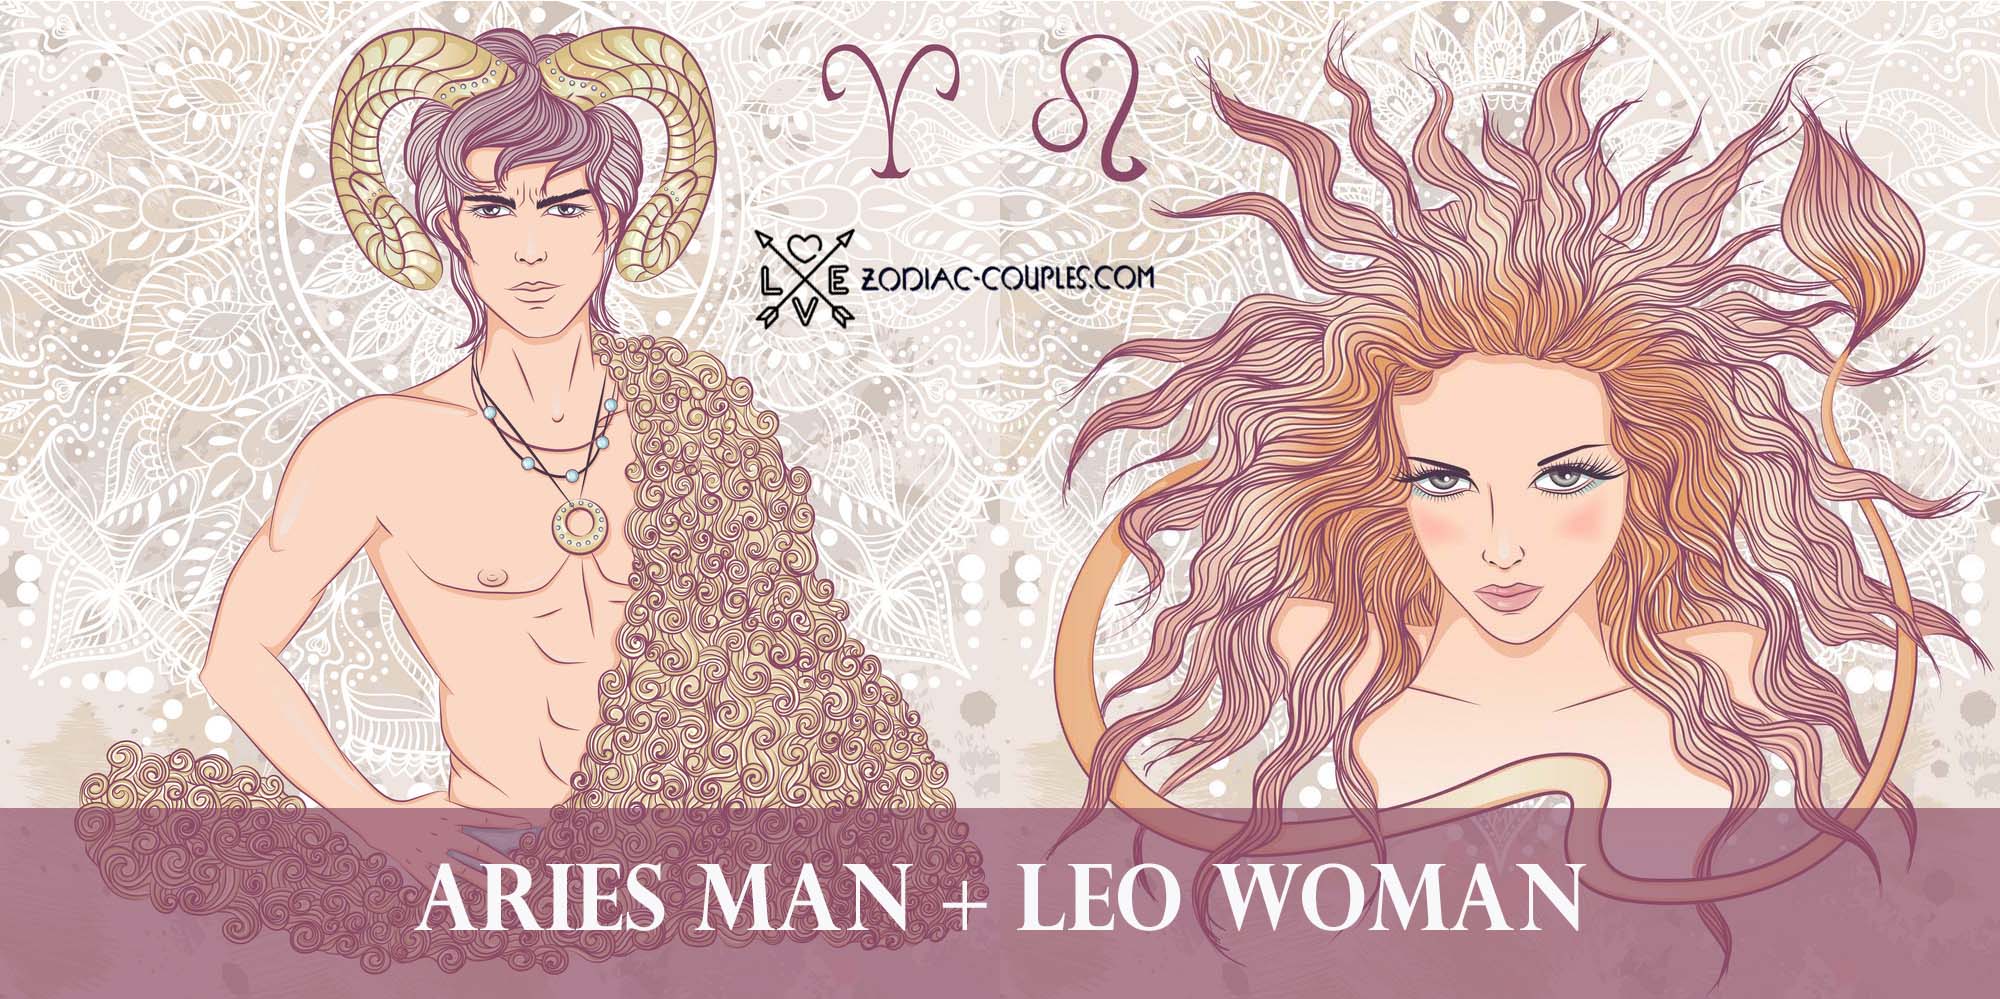 Aries man + Leo woman famous couples and compatibility ♈ ♌ - Zodiac Couples.